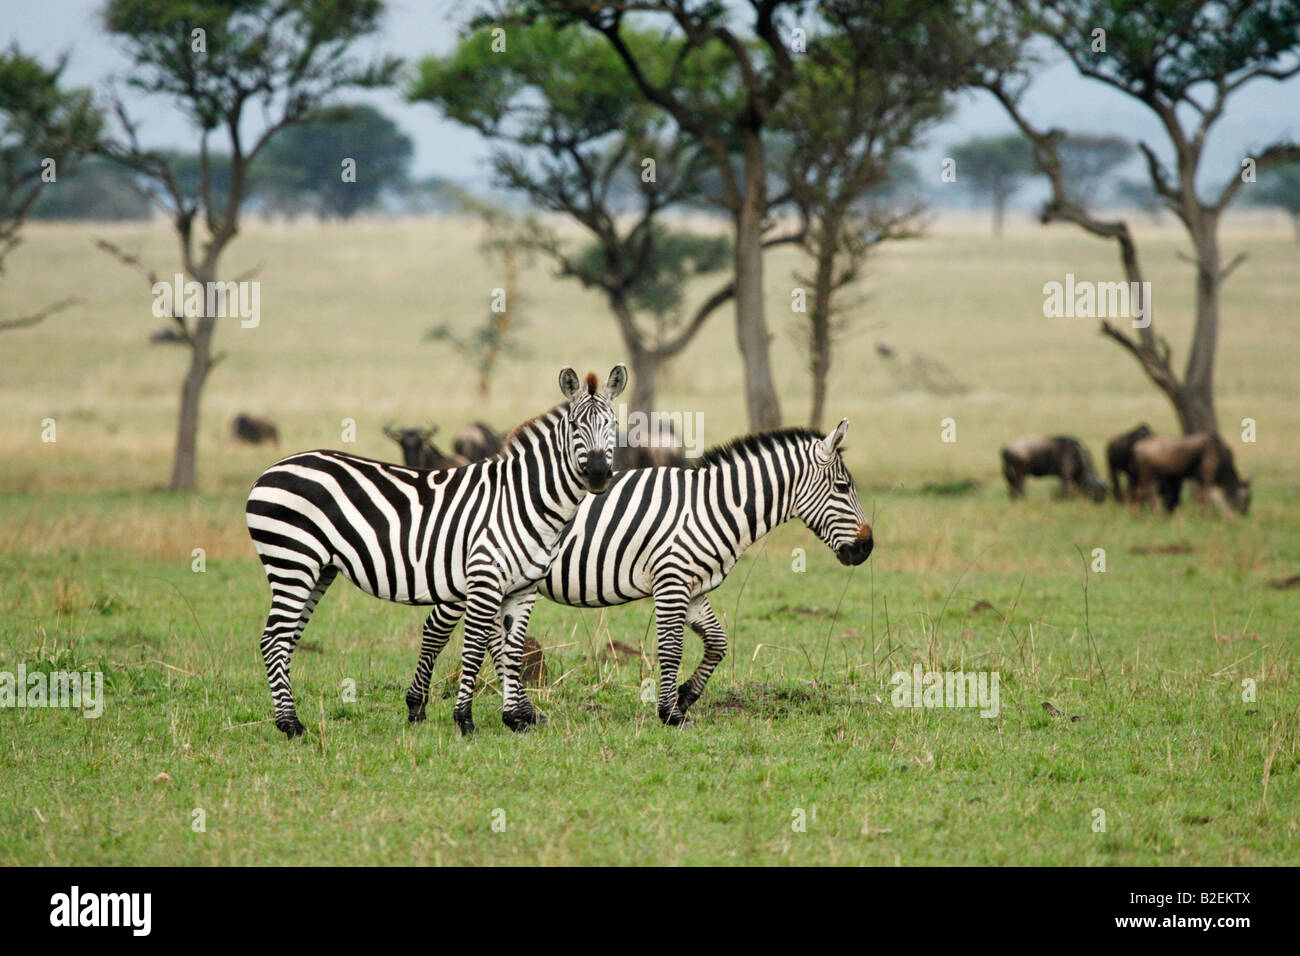 Two plains zebras standing together on an open serengeti savanna Stock Photo